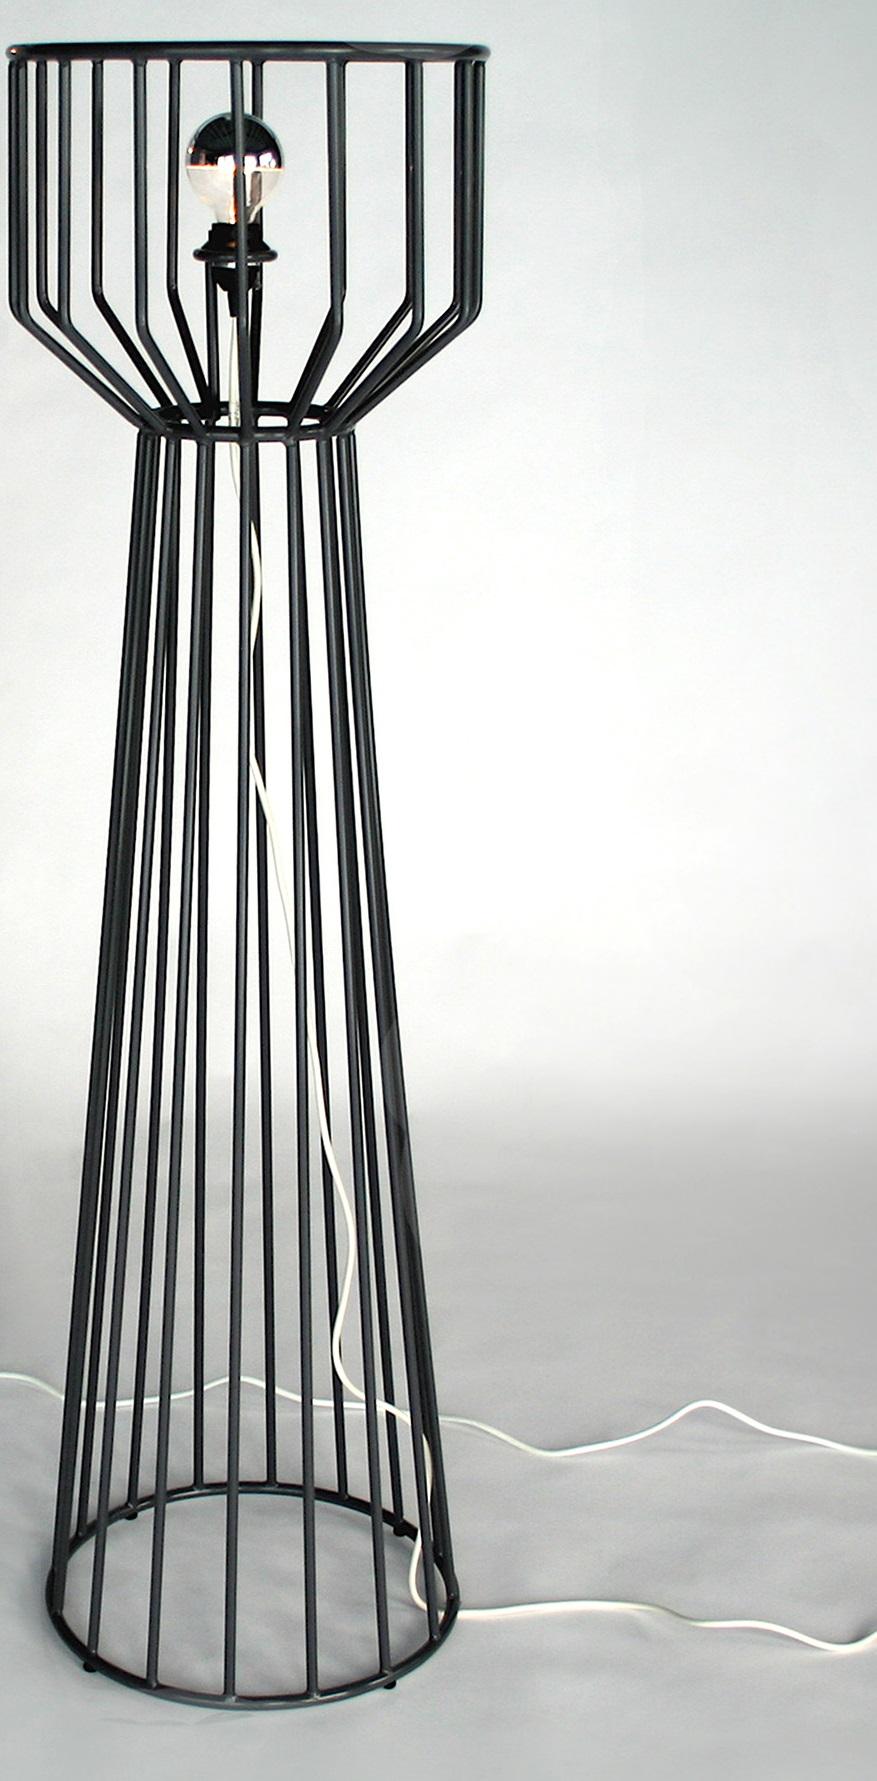 Wired Tall Floor Light by Phase Design
Dimensions: Ø 47 x H 152.4 cm. 
Materials: Powder-coated metal.

Solid steel bar available in gloss or flat black and white powder coat, polished chrome, burnt copper, or smoked brass finish. Powder coat